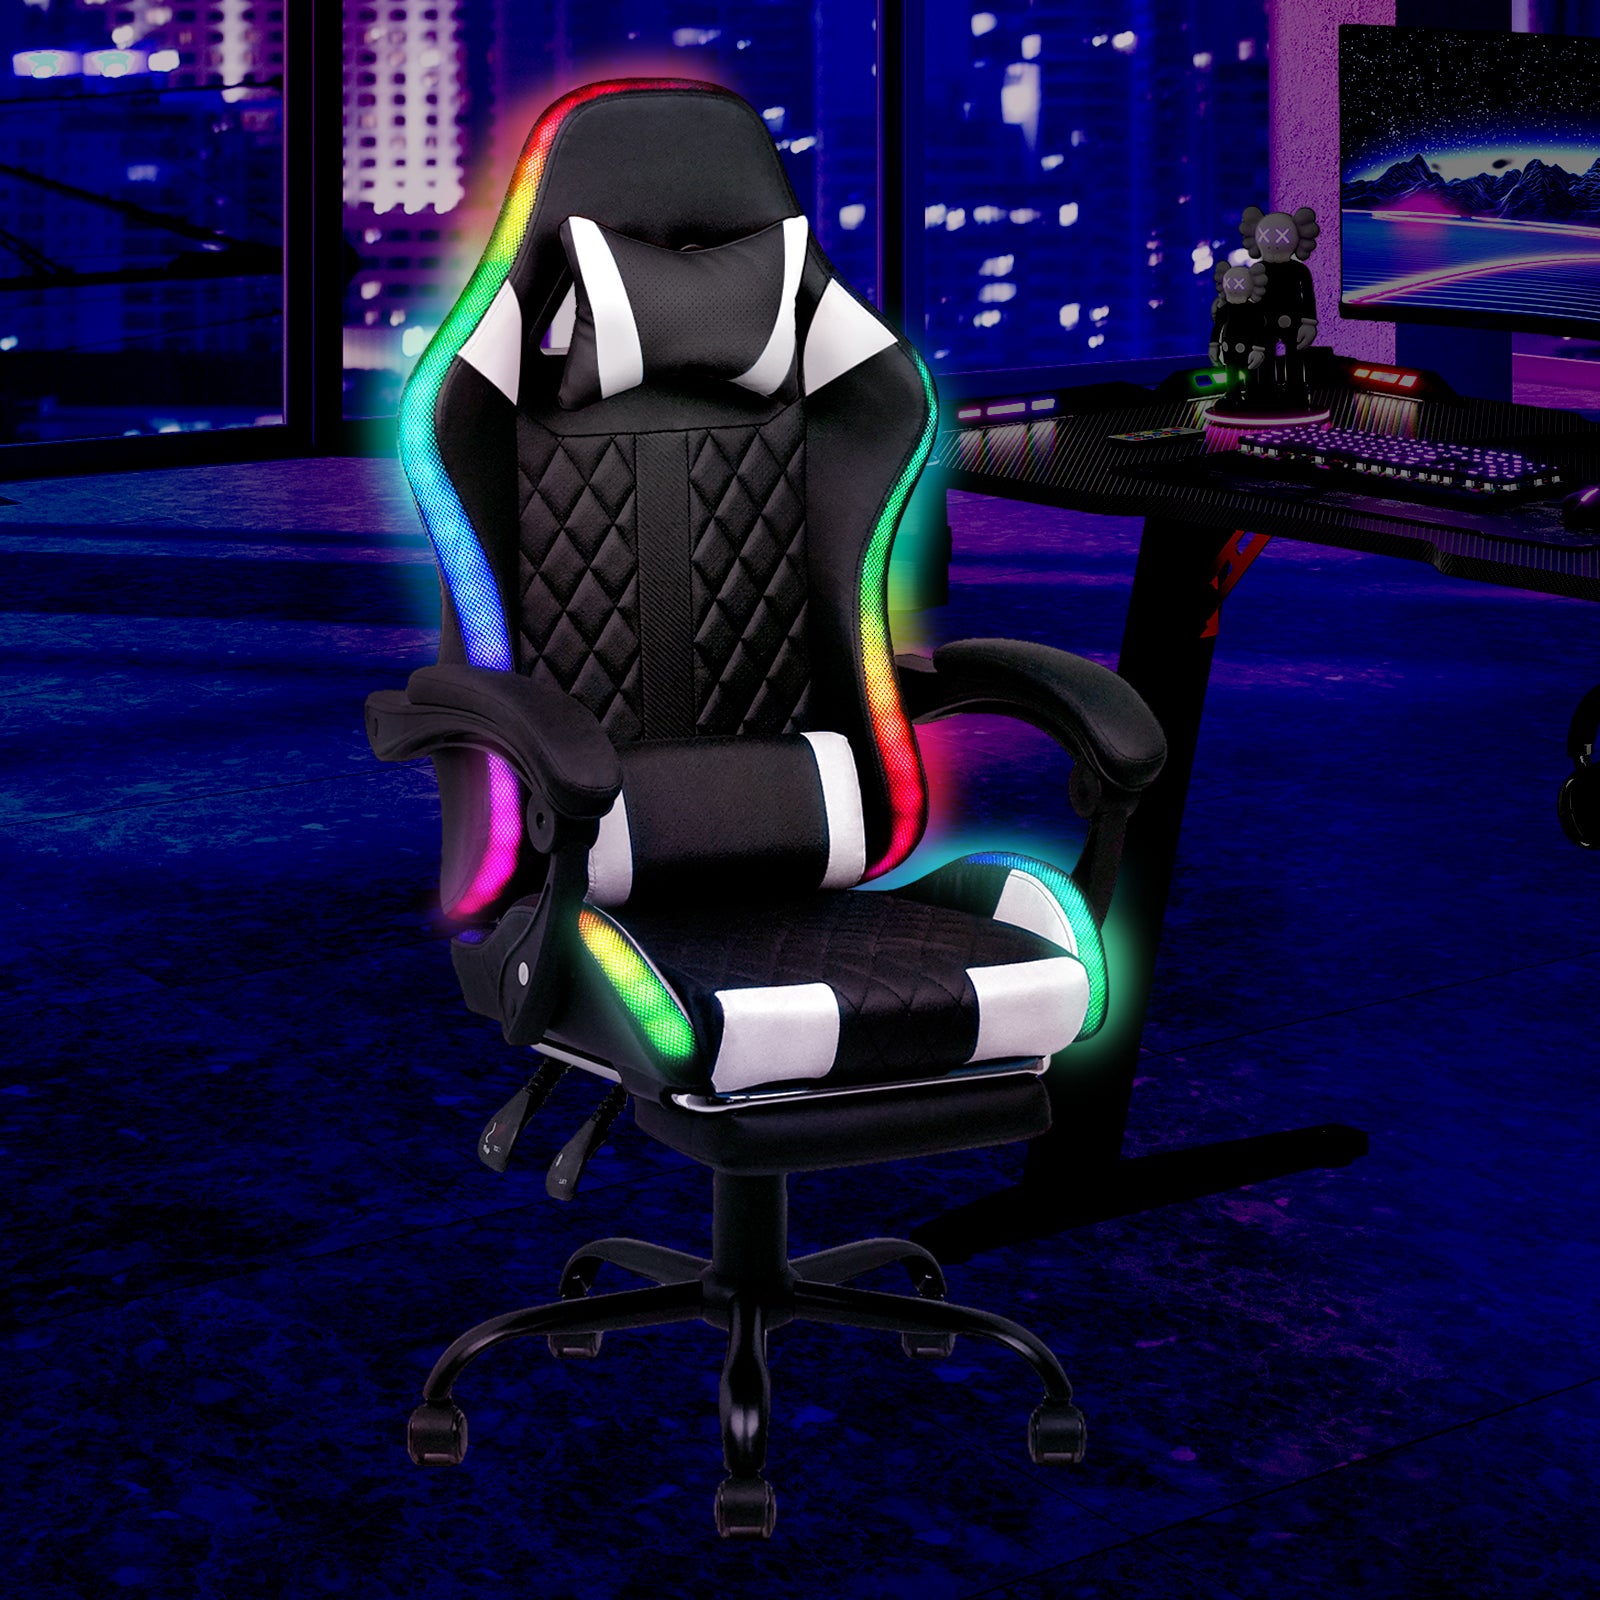 Advwin Gaming Chair 12 RGB LED Massage Ergonomic Executive Office Chair Computer Racing Recliner Footrest Seat Black & White